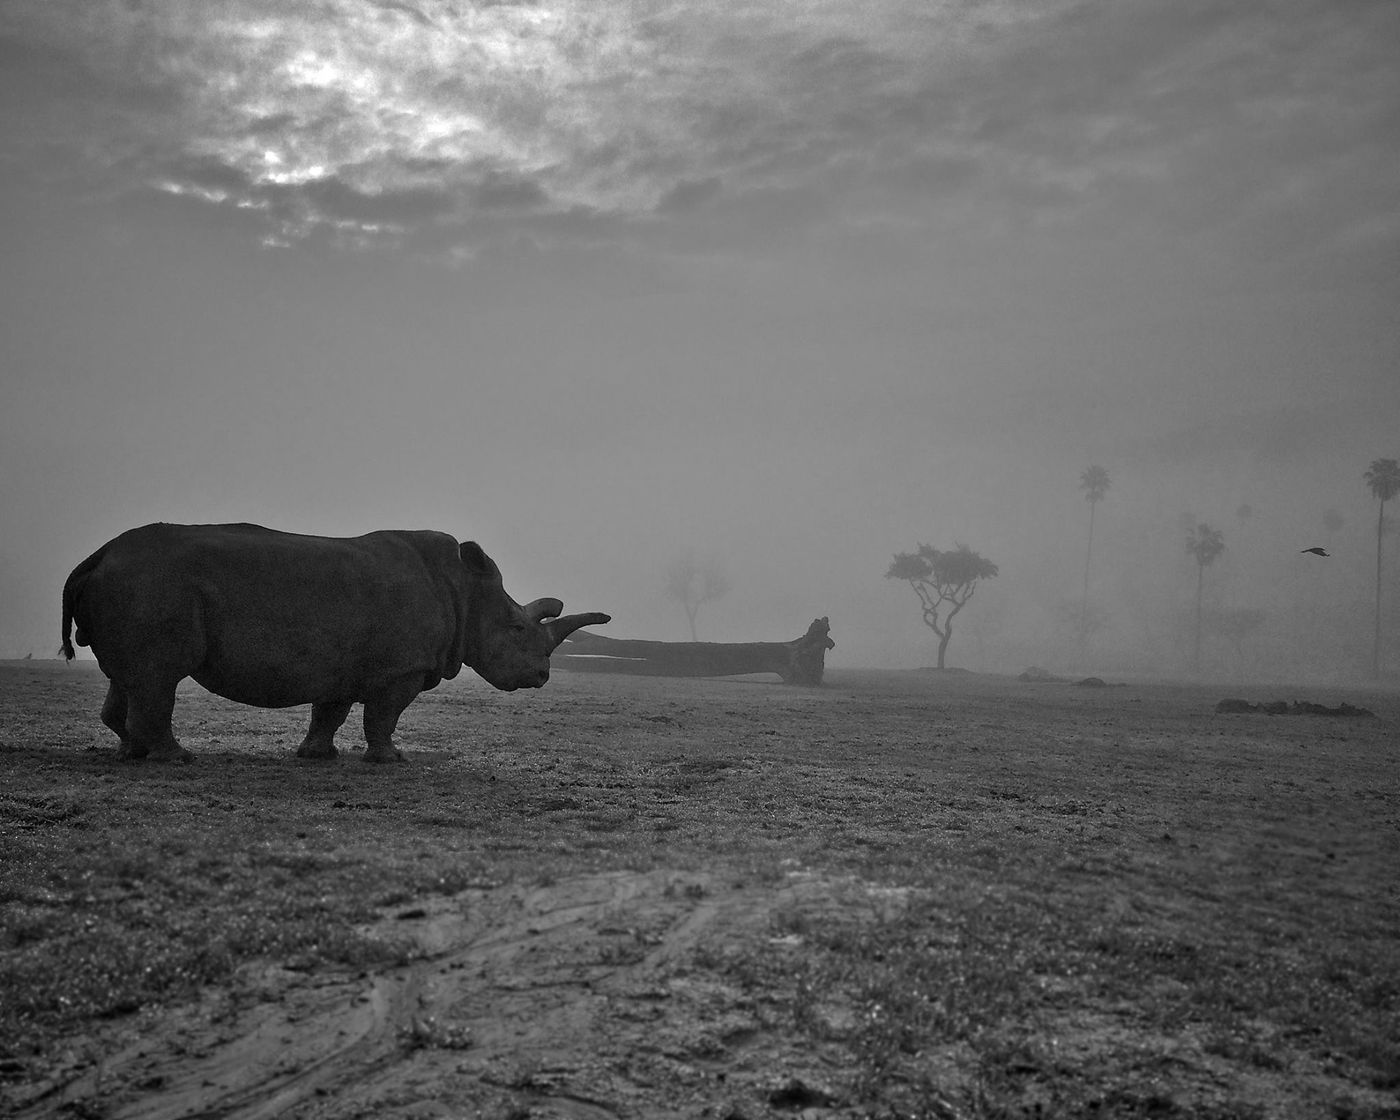 Nola was one of the world's last remaining white rhinos. She passed away in November of 2015.